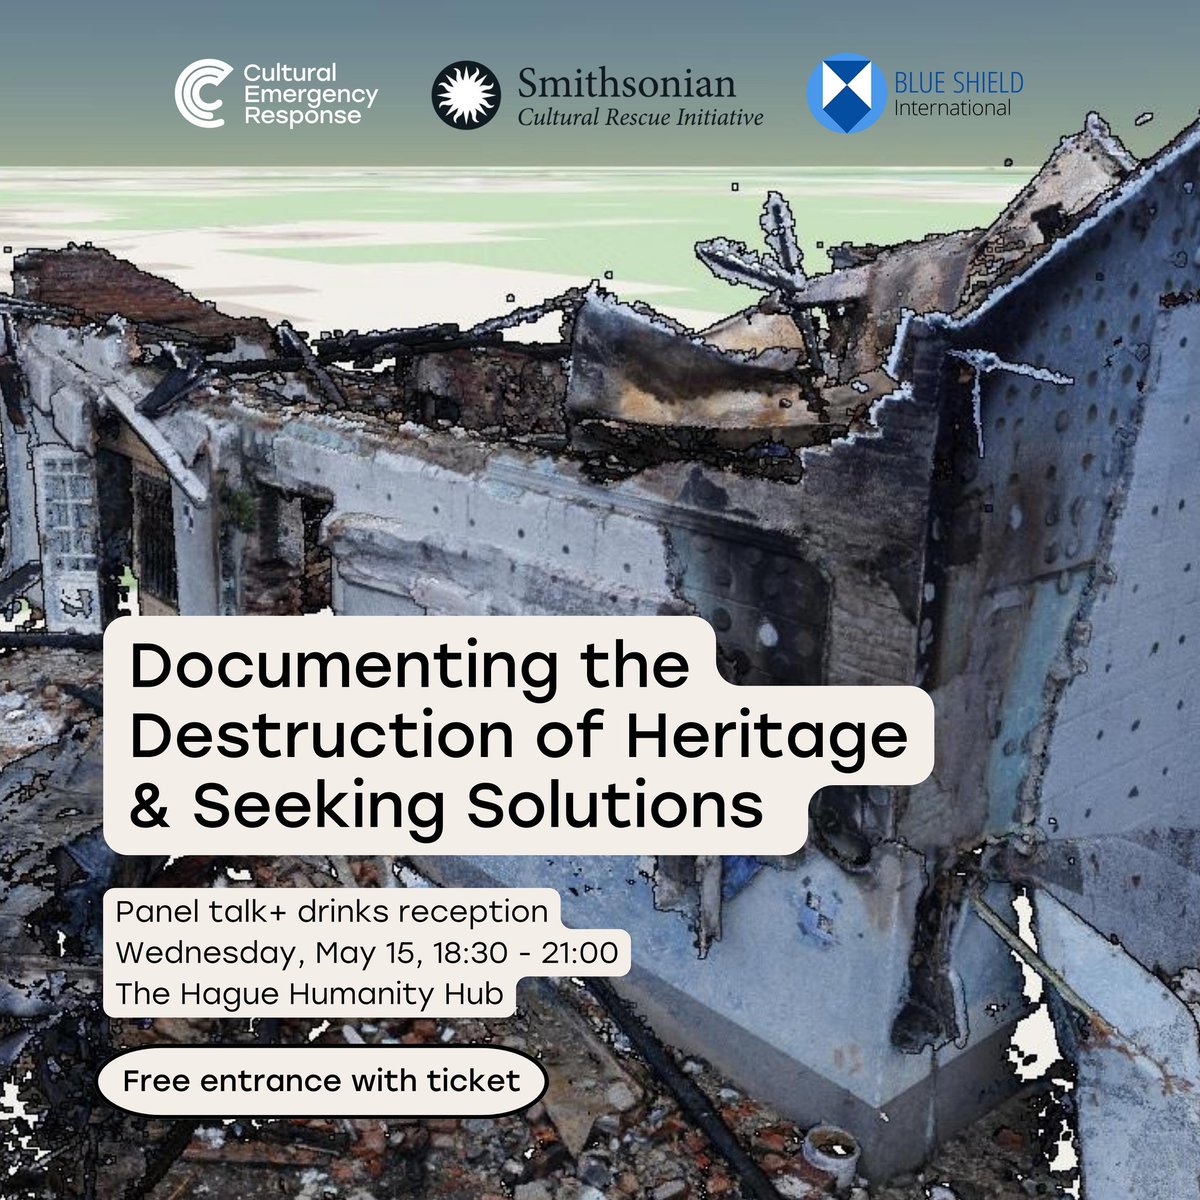 Join @CERorganization @Smithsonian Cultural Rescue Initiative & BSI on May 15 for ‘Documenting the Destruction of Heritage & Seeking Solutions’ as the #1954HagueConvention turns 70 📷Date: May 15 📷Time: 18:30 - 21:00 📷Location: Humanity Hub Register - bit.ly/44FZb5p